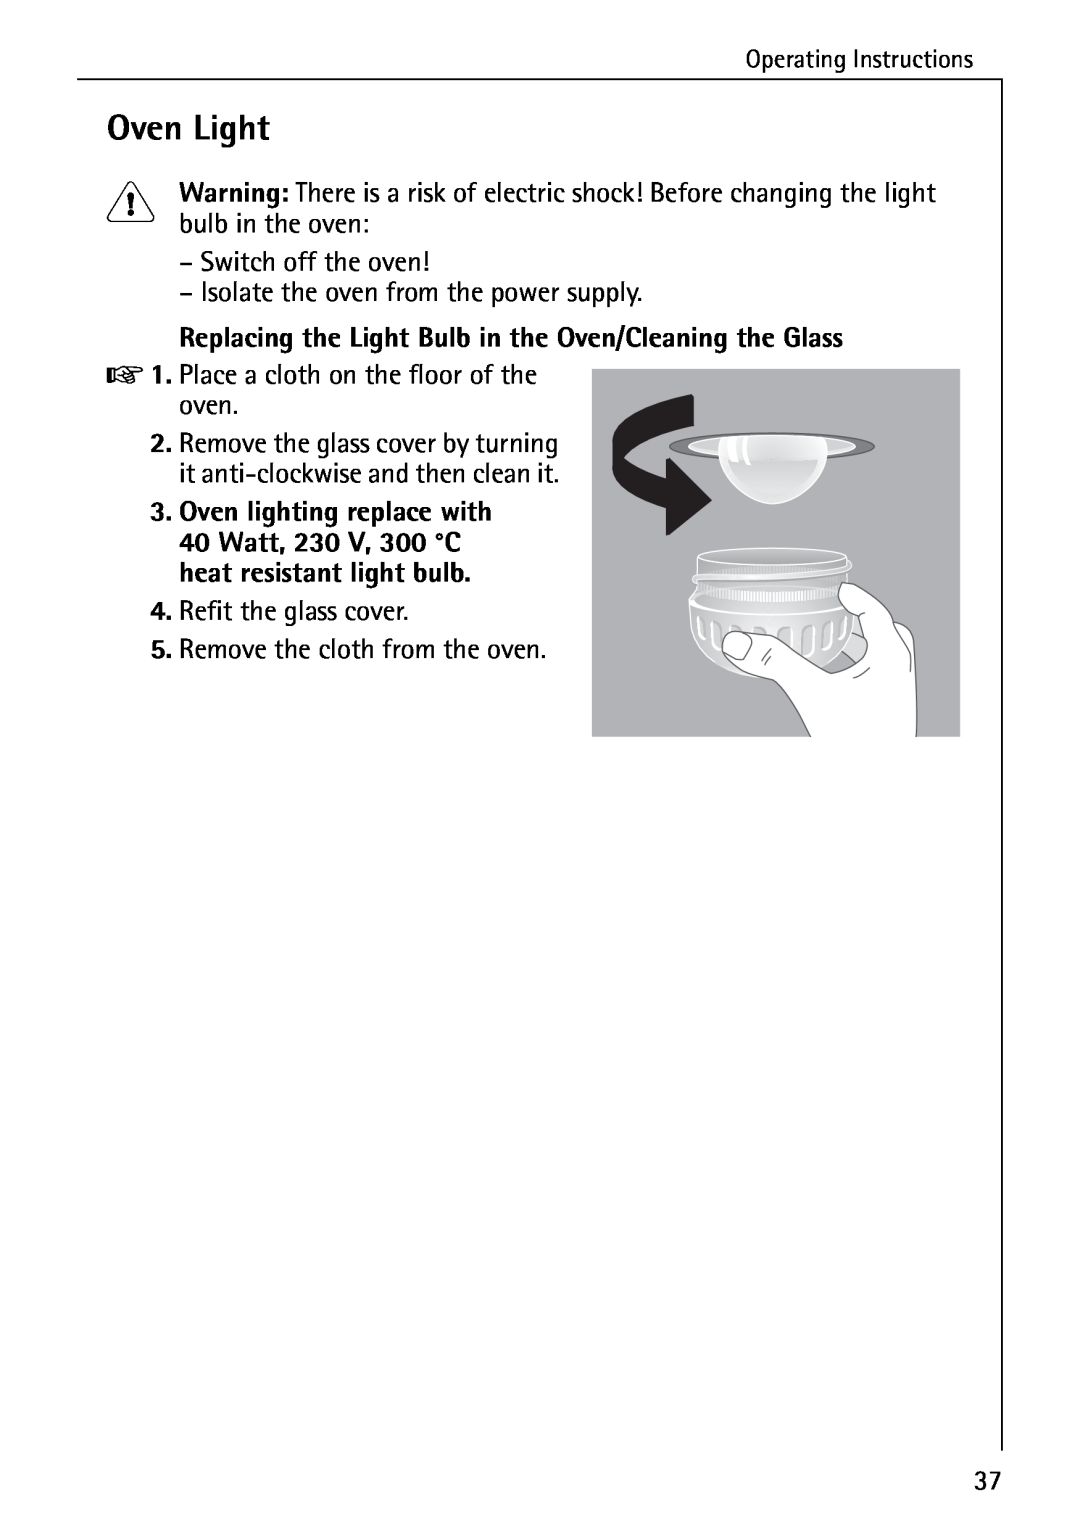 AEG B 4130 manual Oven Light, bulb in the oven, heat resistant light bulb, Operating Instructions 